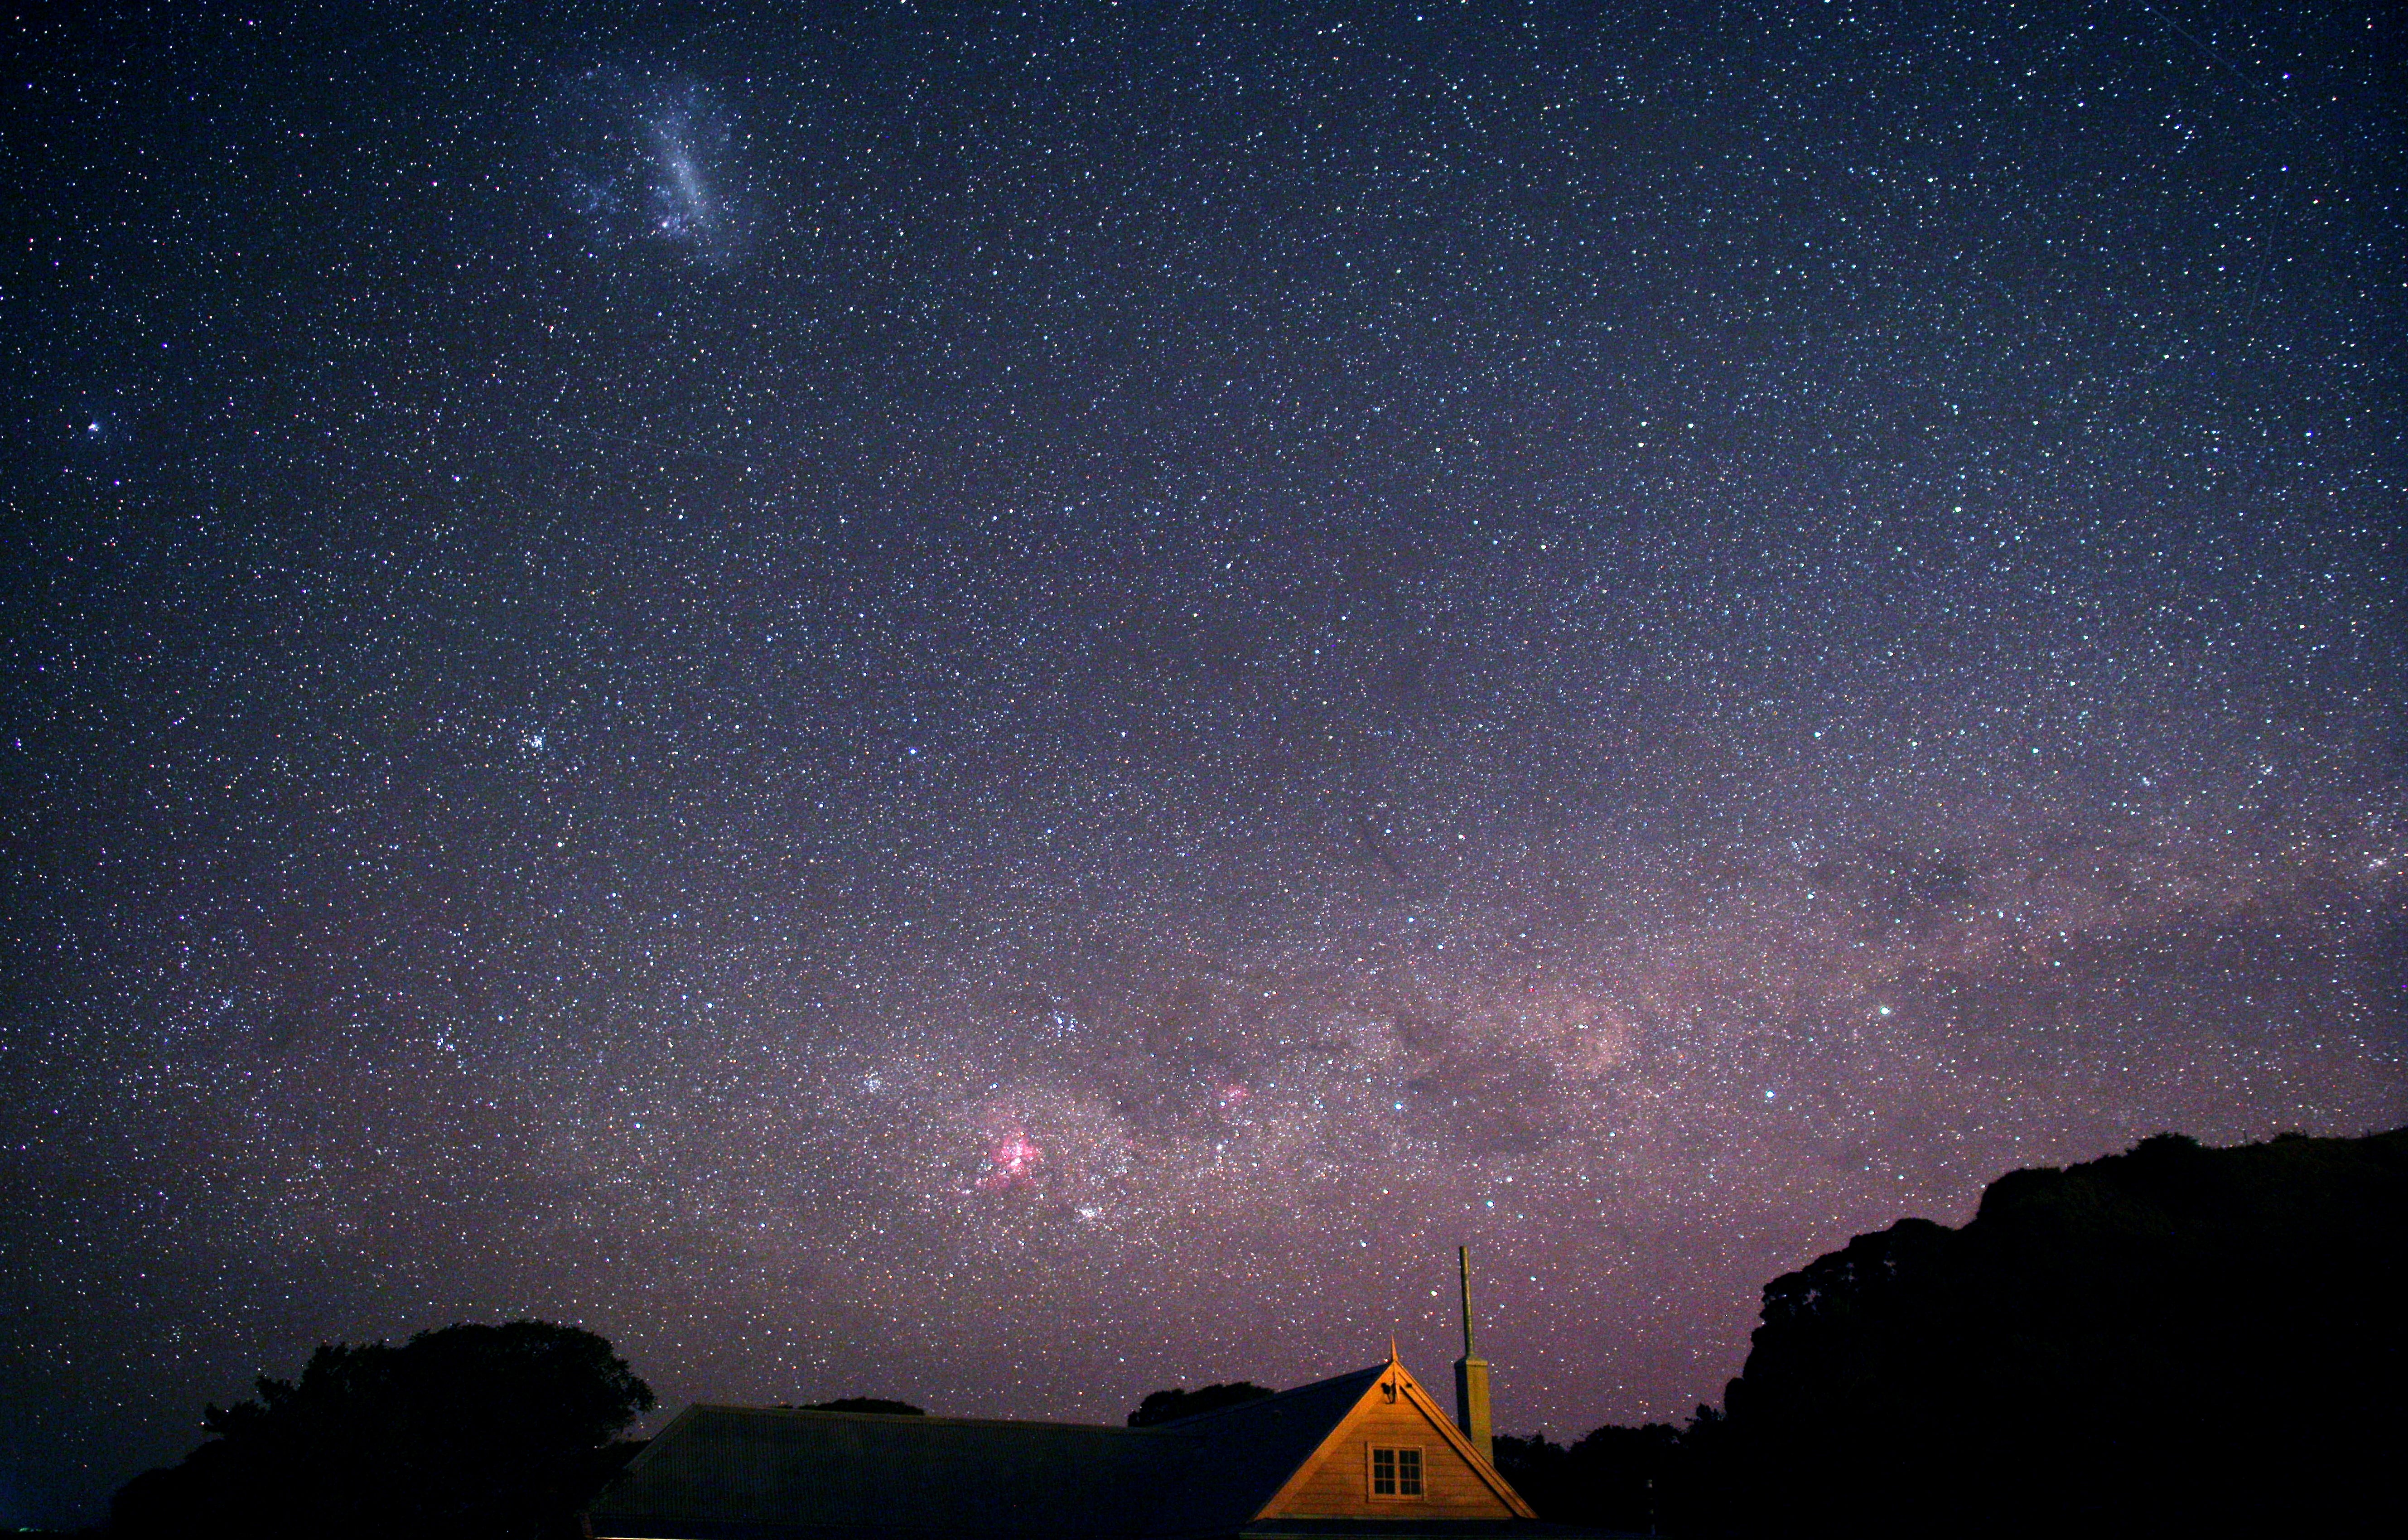 There are incredible astrotourism experiences to be had in New Zealand, and to see the beauty of the Milky Way so clearly is certainly one of them